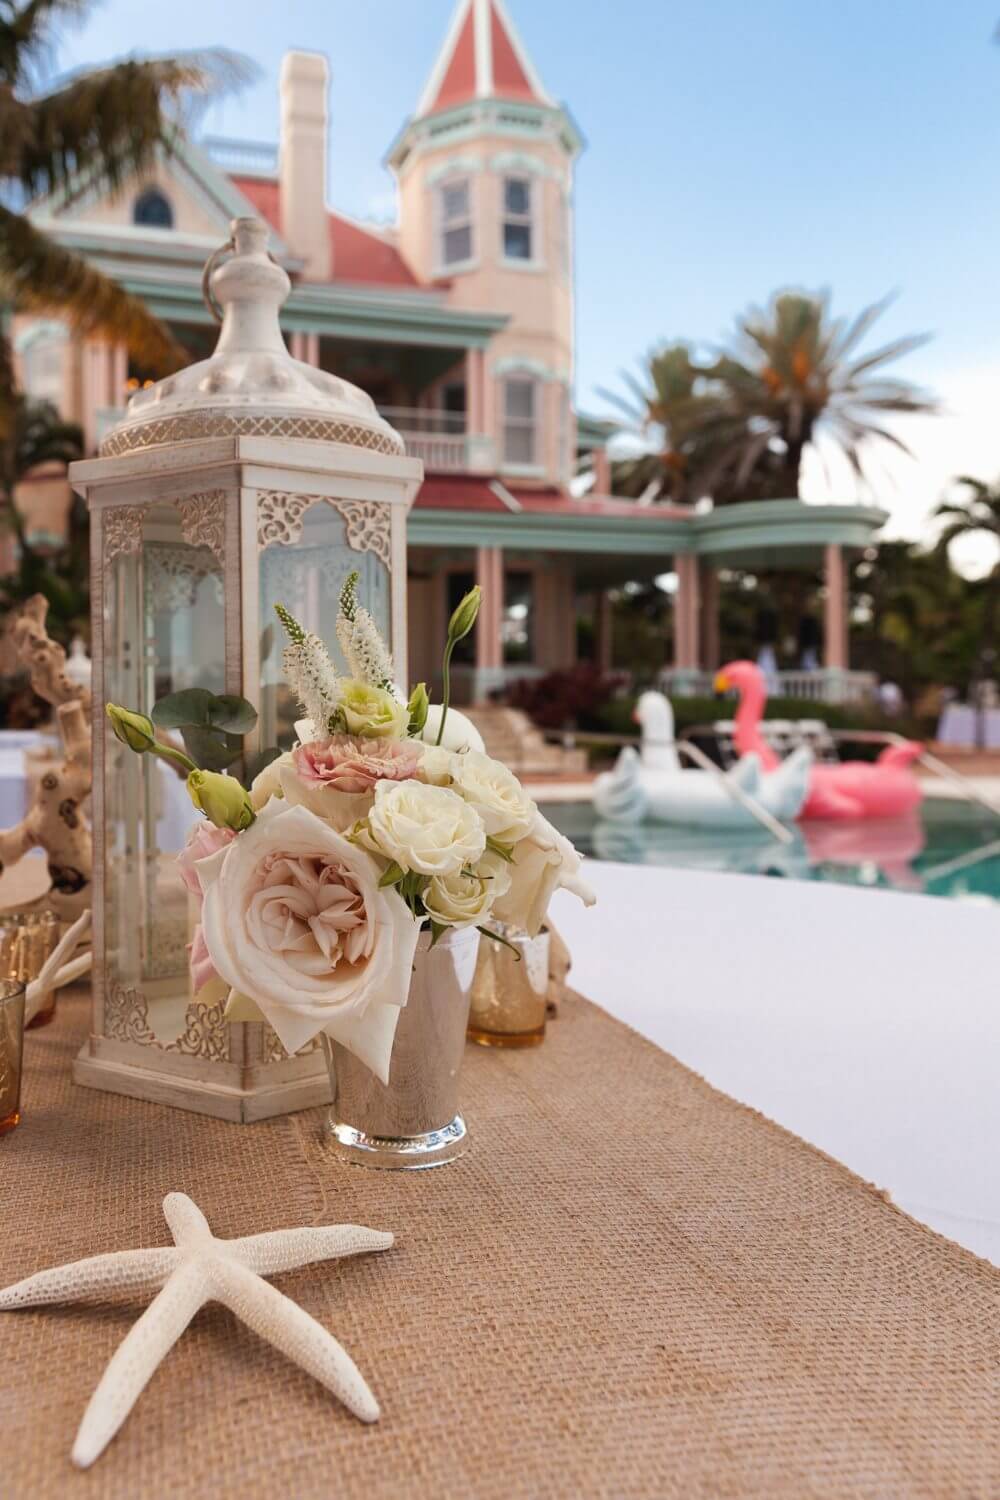 A table with flowers and a lantern next to a pool, perfect for a Key West wedding at the Southernmost Mansion.